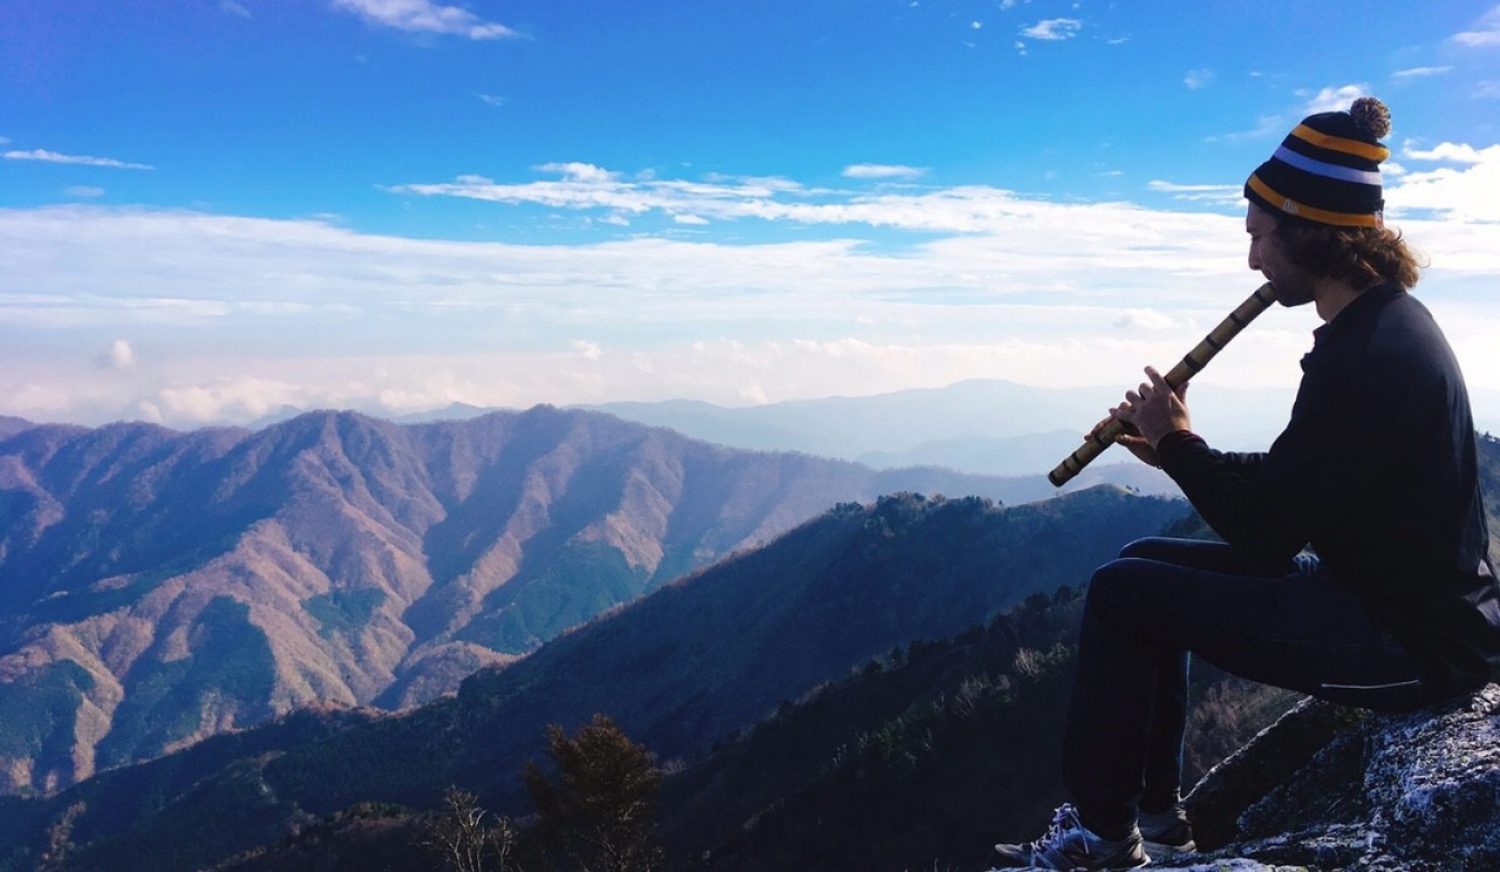 A person playing an instrument on top of a mountain